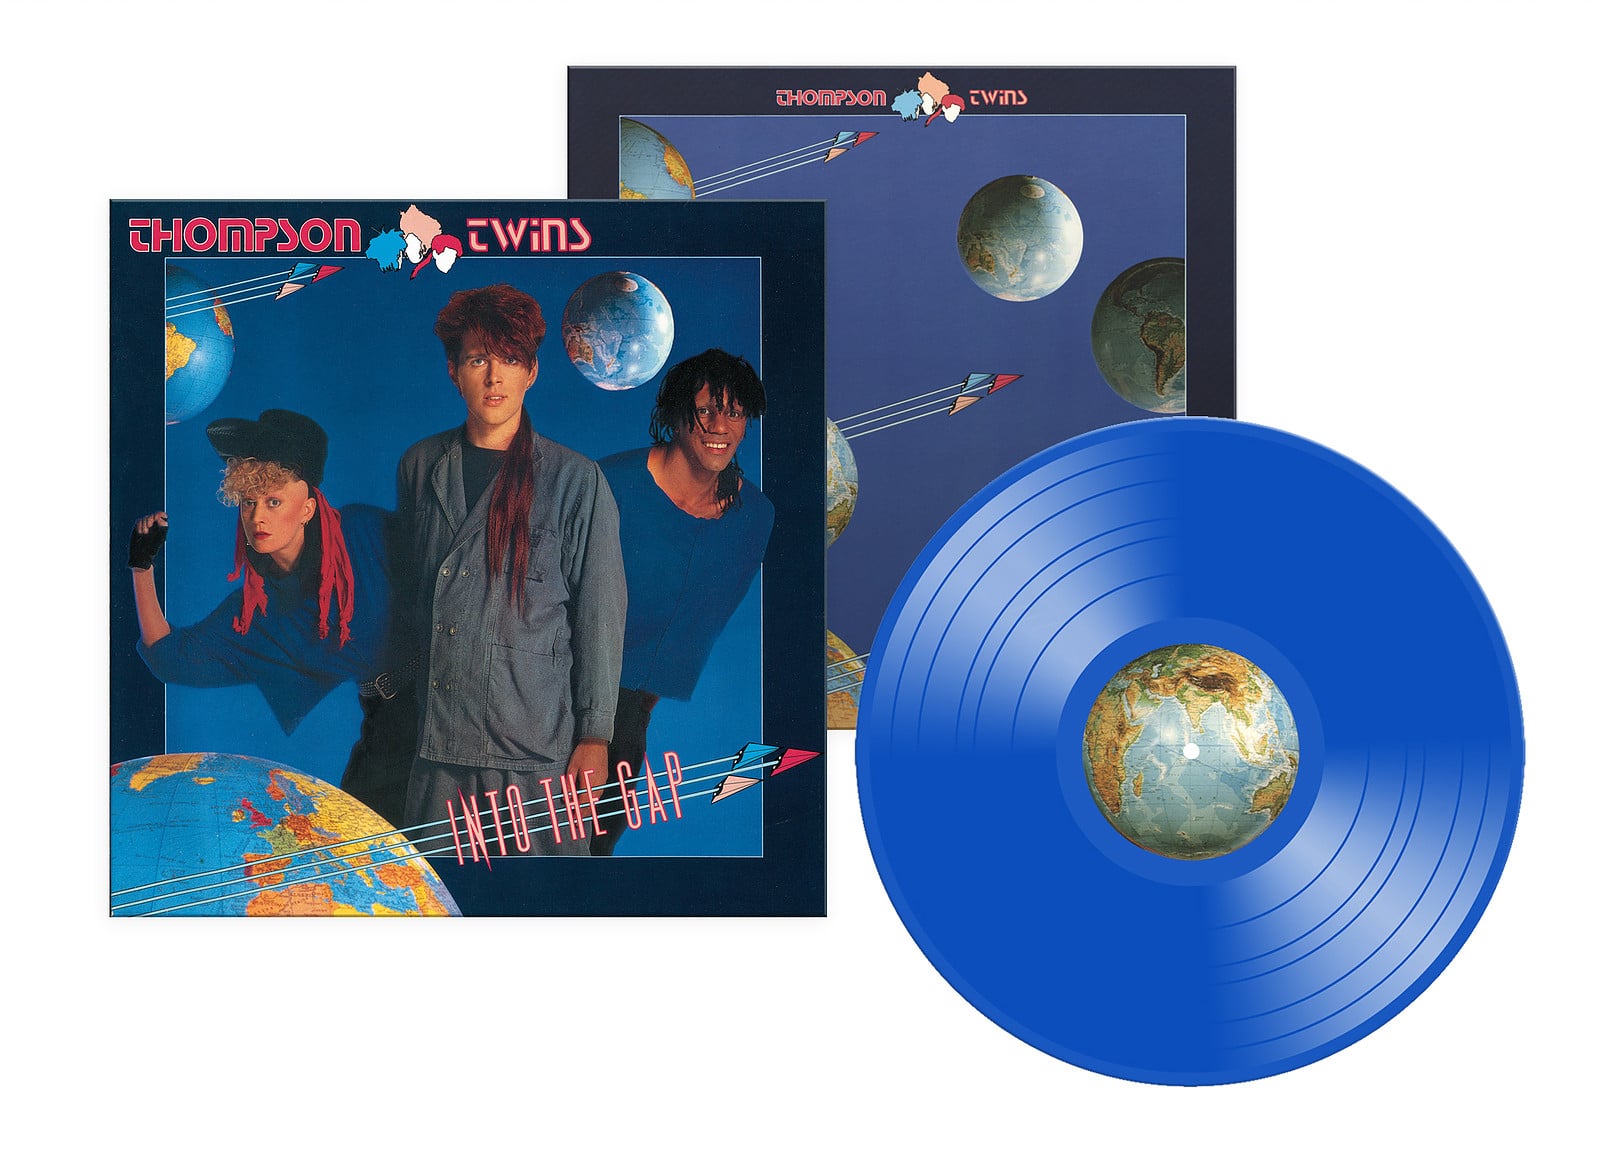 THOMPSON TWINS are into the gap - The Audiophile Man